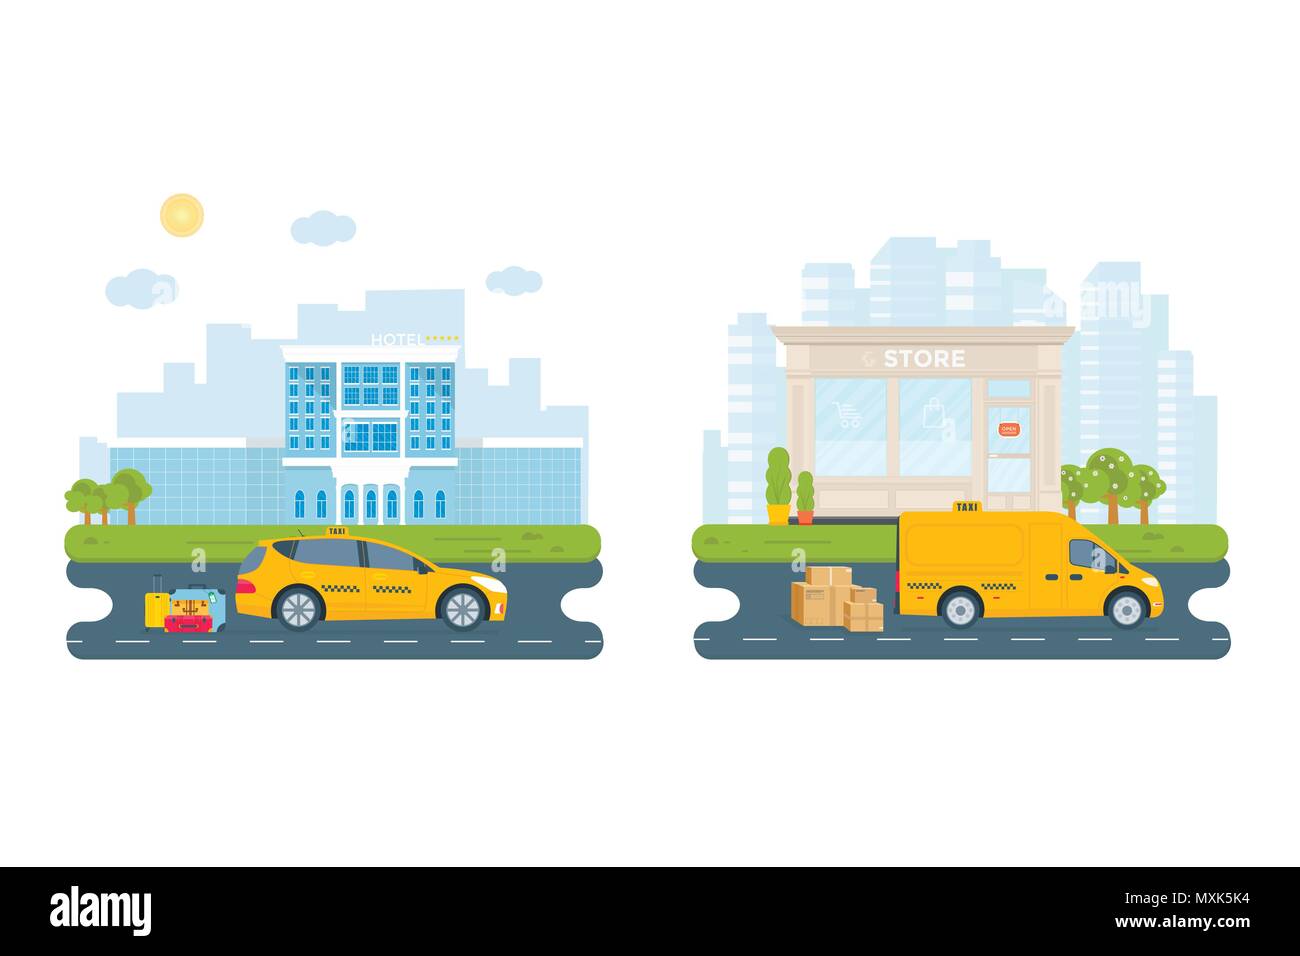 Banner with the machine yellow cab in the city. Public taxi service concept. Cityscape, airport, hotel, store on the background. Flat vector illustrat Stock Vector